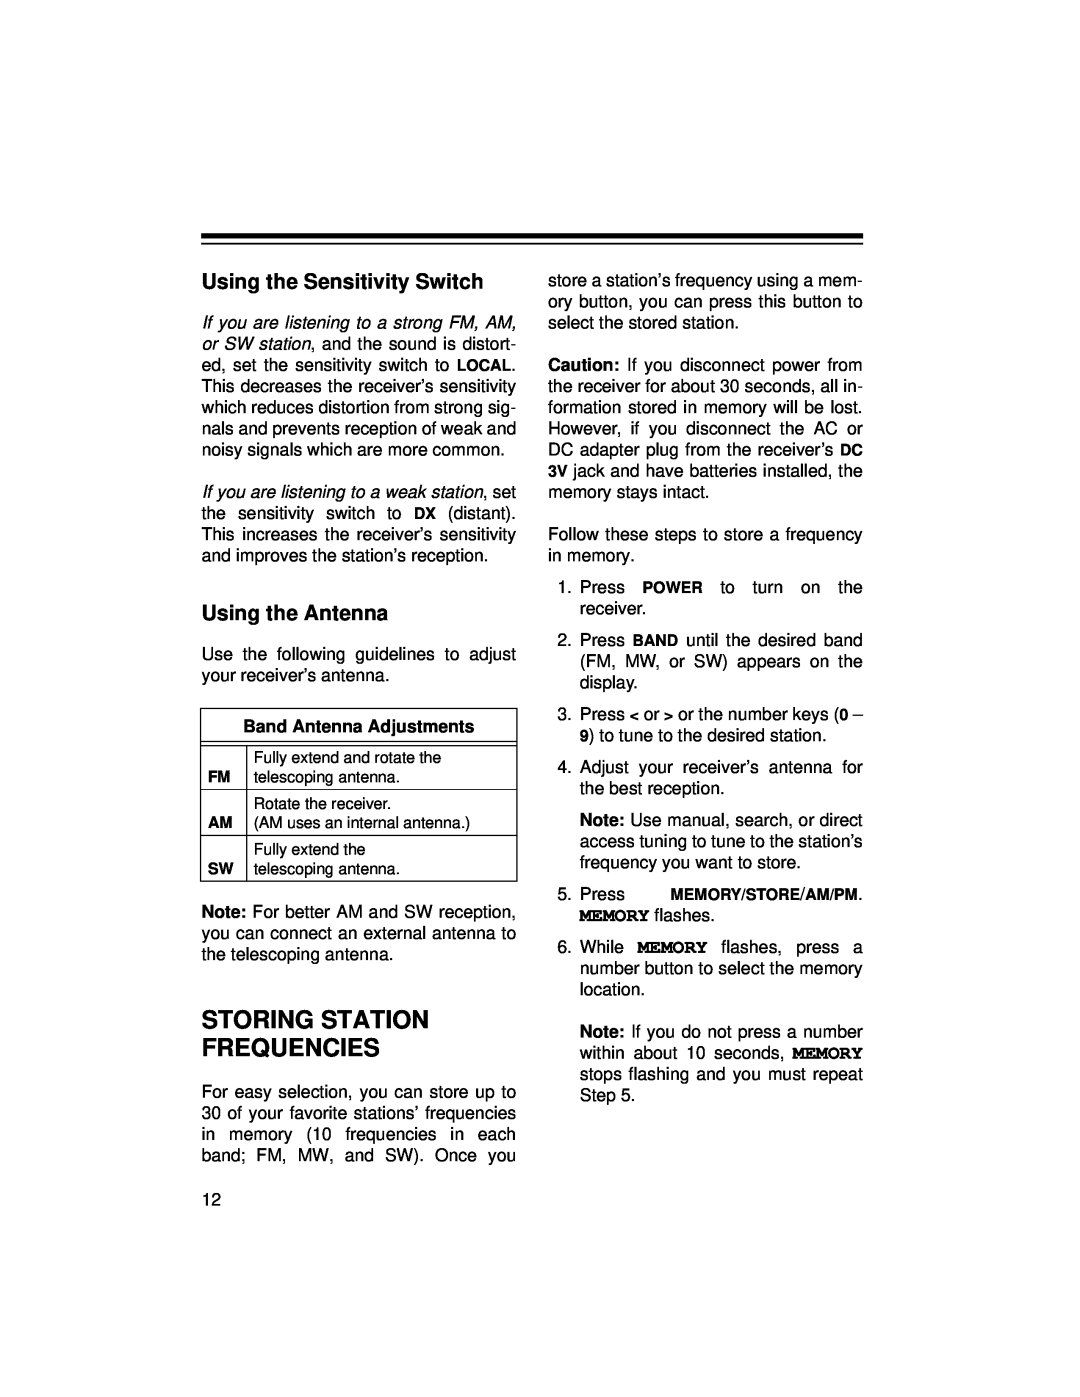 Radio Shack DX-396 owner manual Storing Station Frequencies, Using the Sensitivity Switch, Using the Antenna 